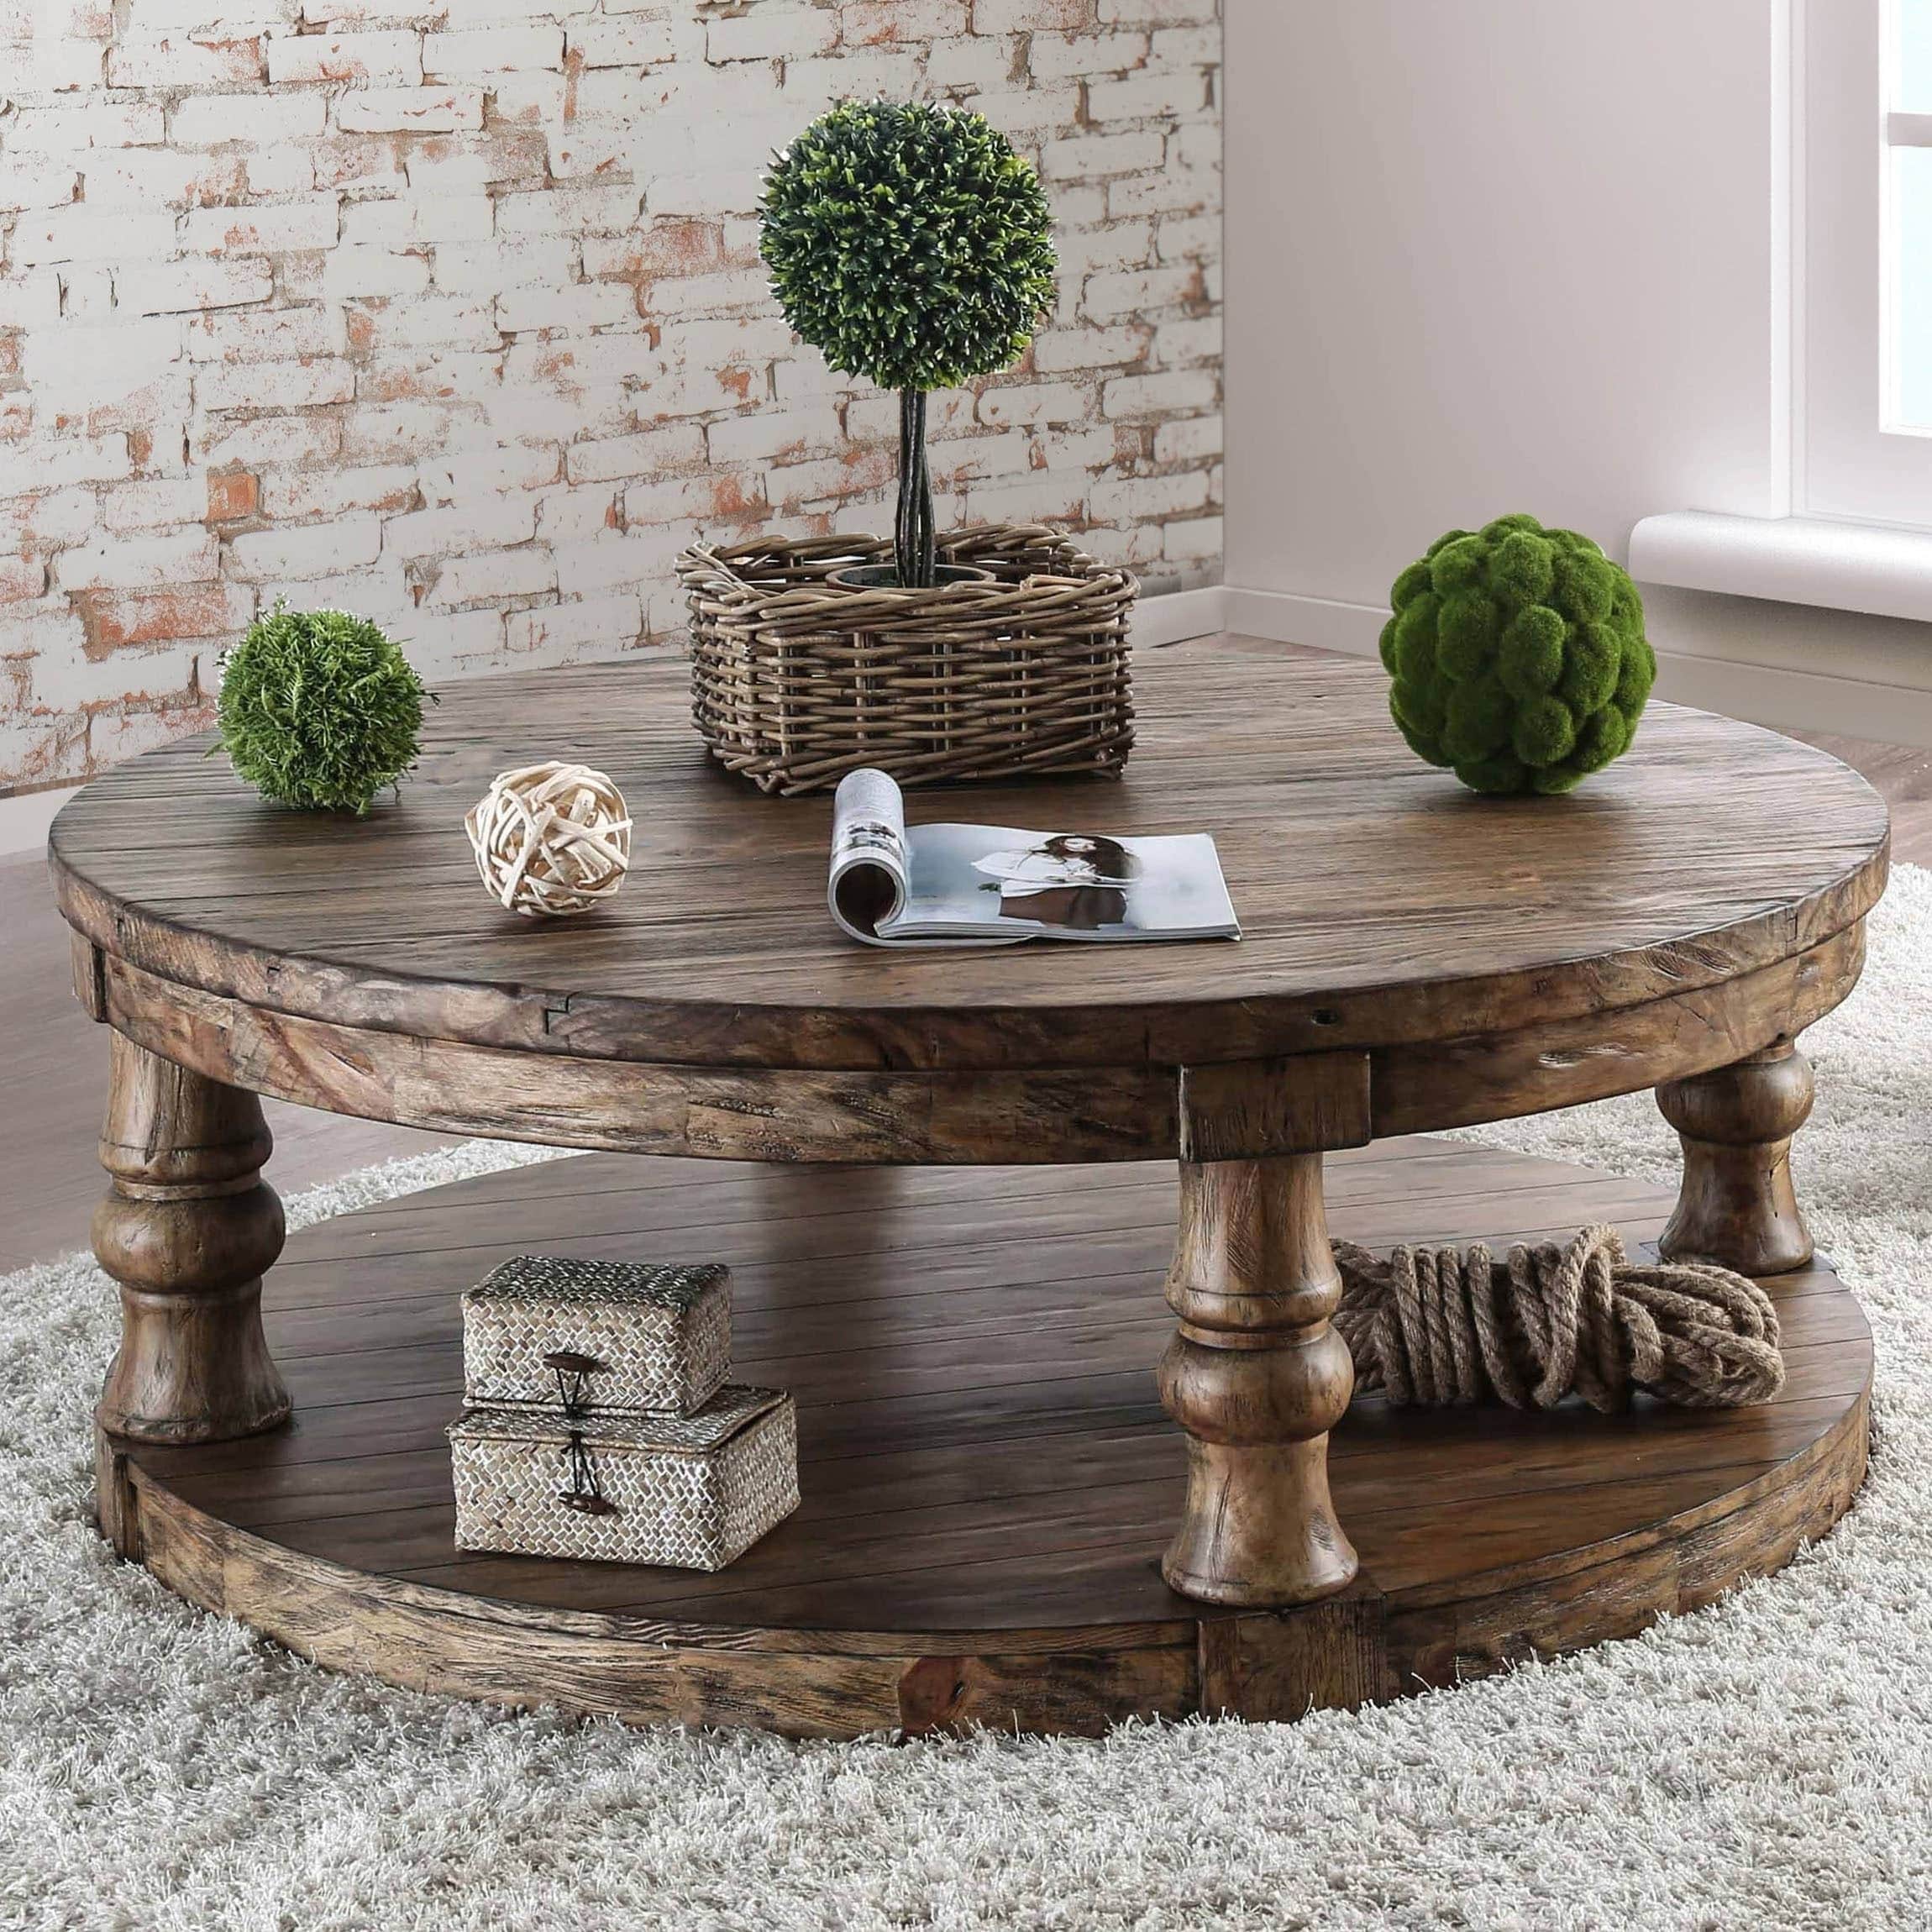 Pictures Of Round Coffee Tables